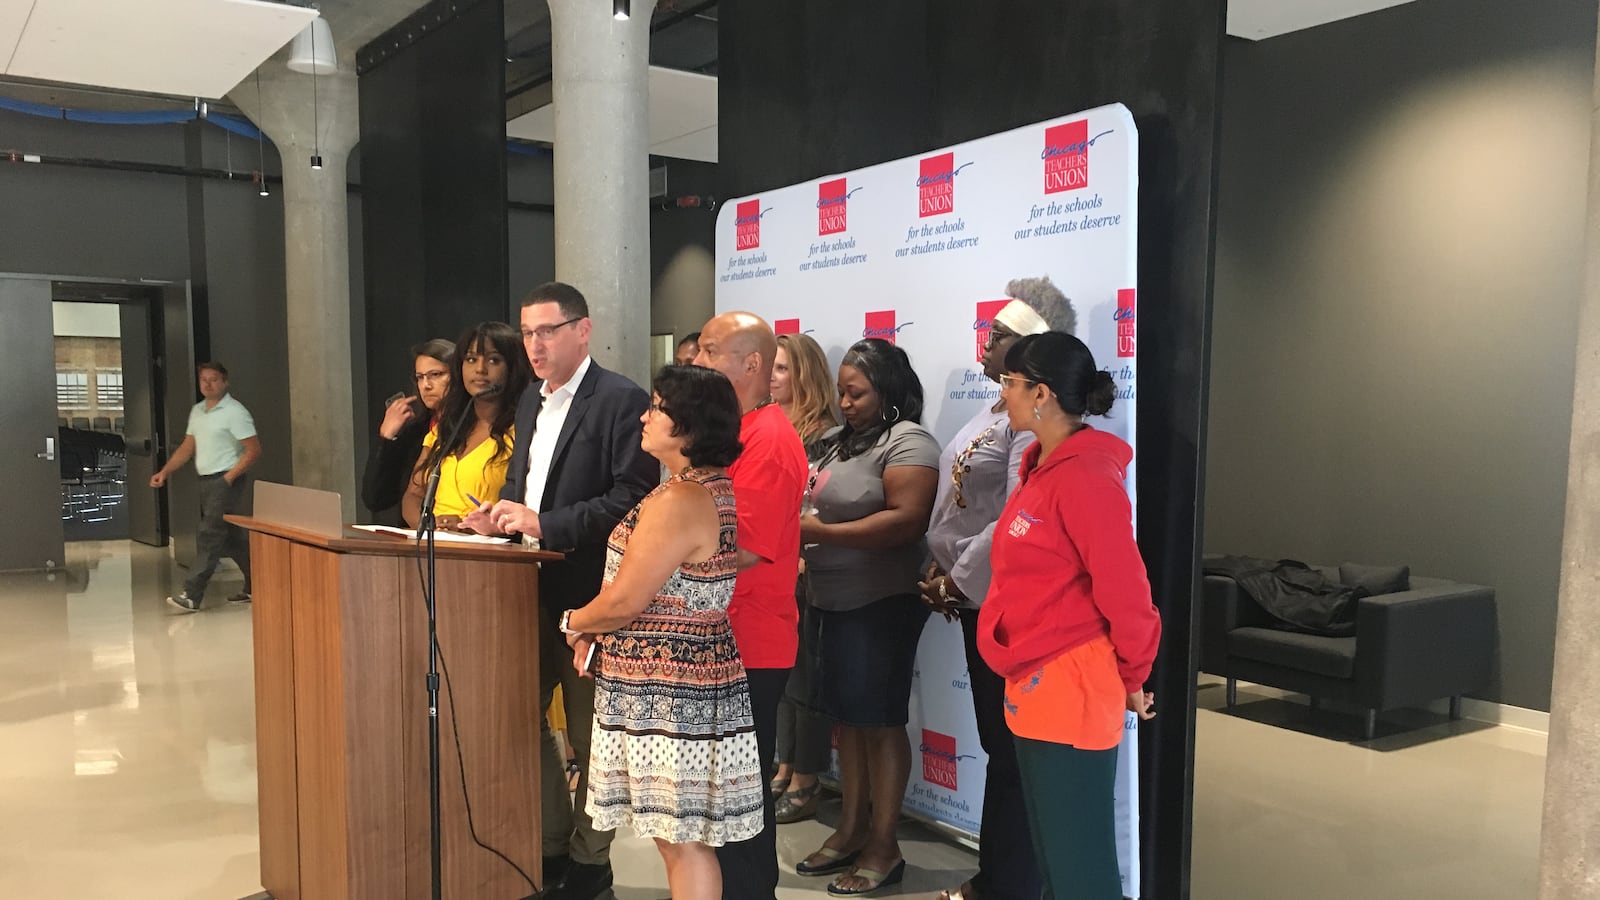 Chicago Teachers Union chief Jesse Sharkey  flanked by union officials on Sept. 4, 2018, the day Mayor Rahm Emanuel announced he was not seeking a third term. To his right is Stacy Davis Gates, the union's new vice president.